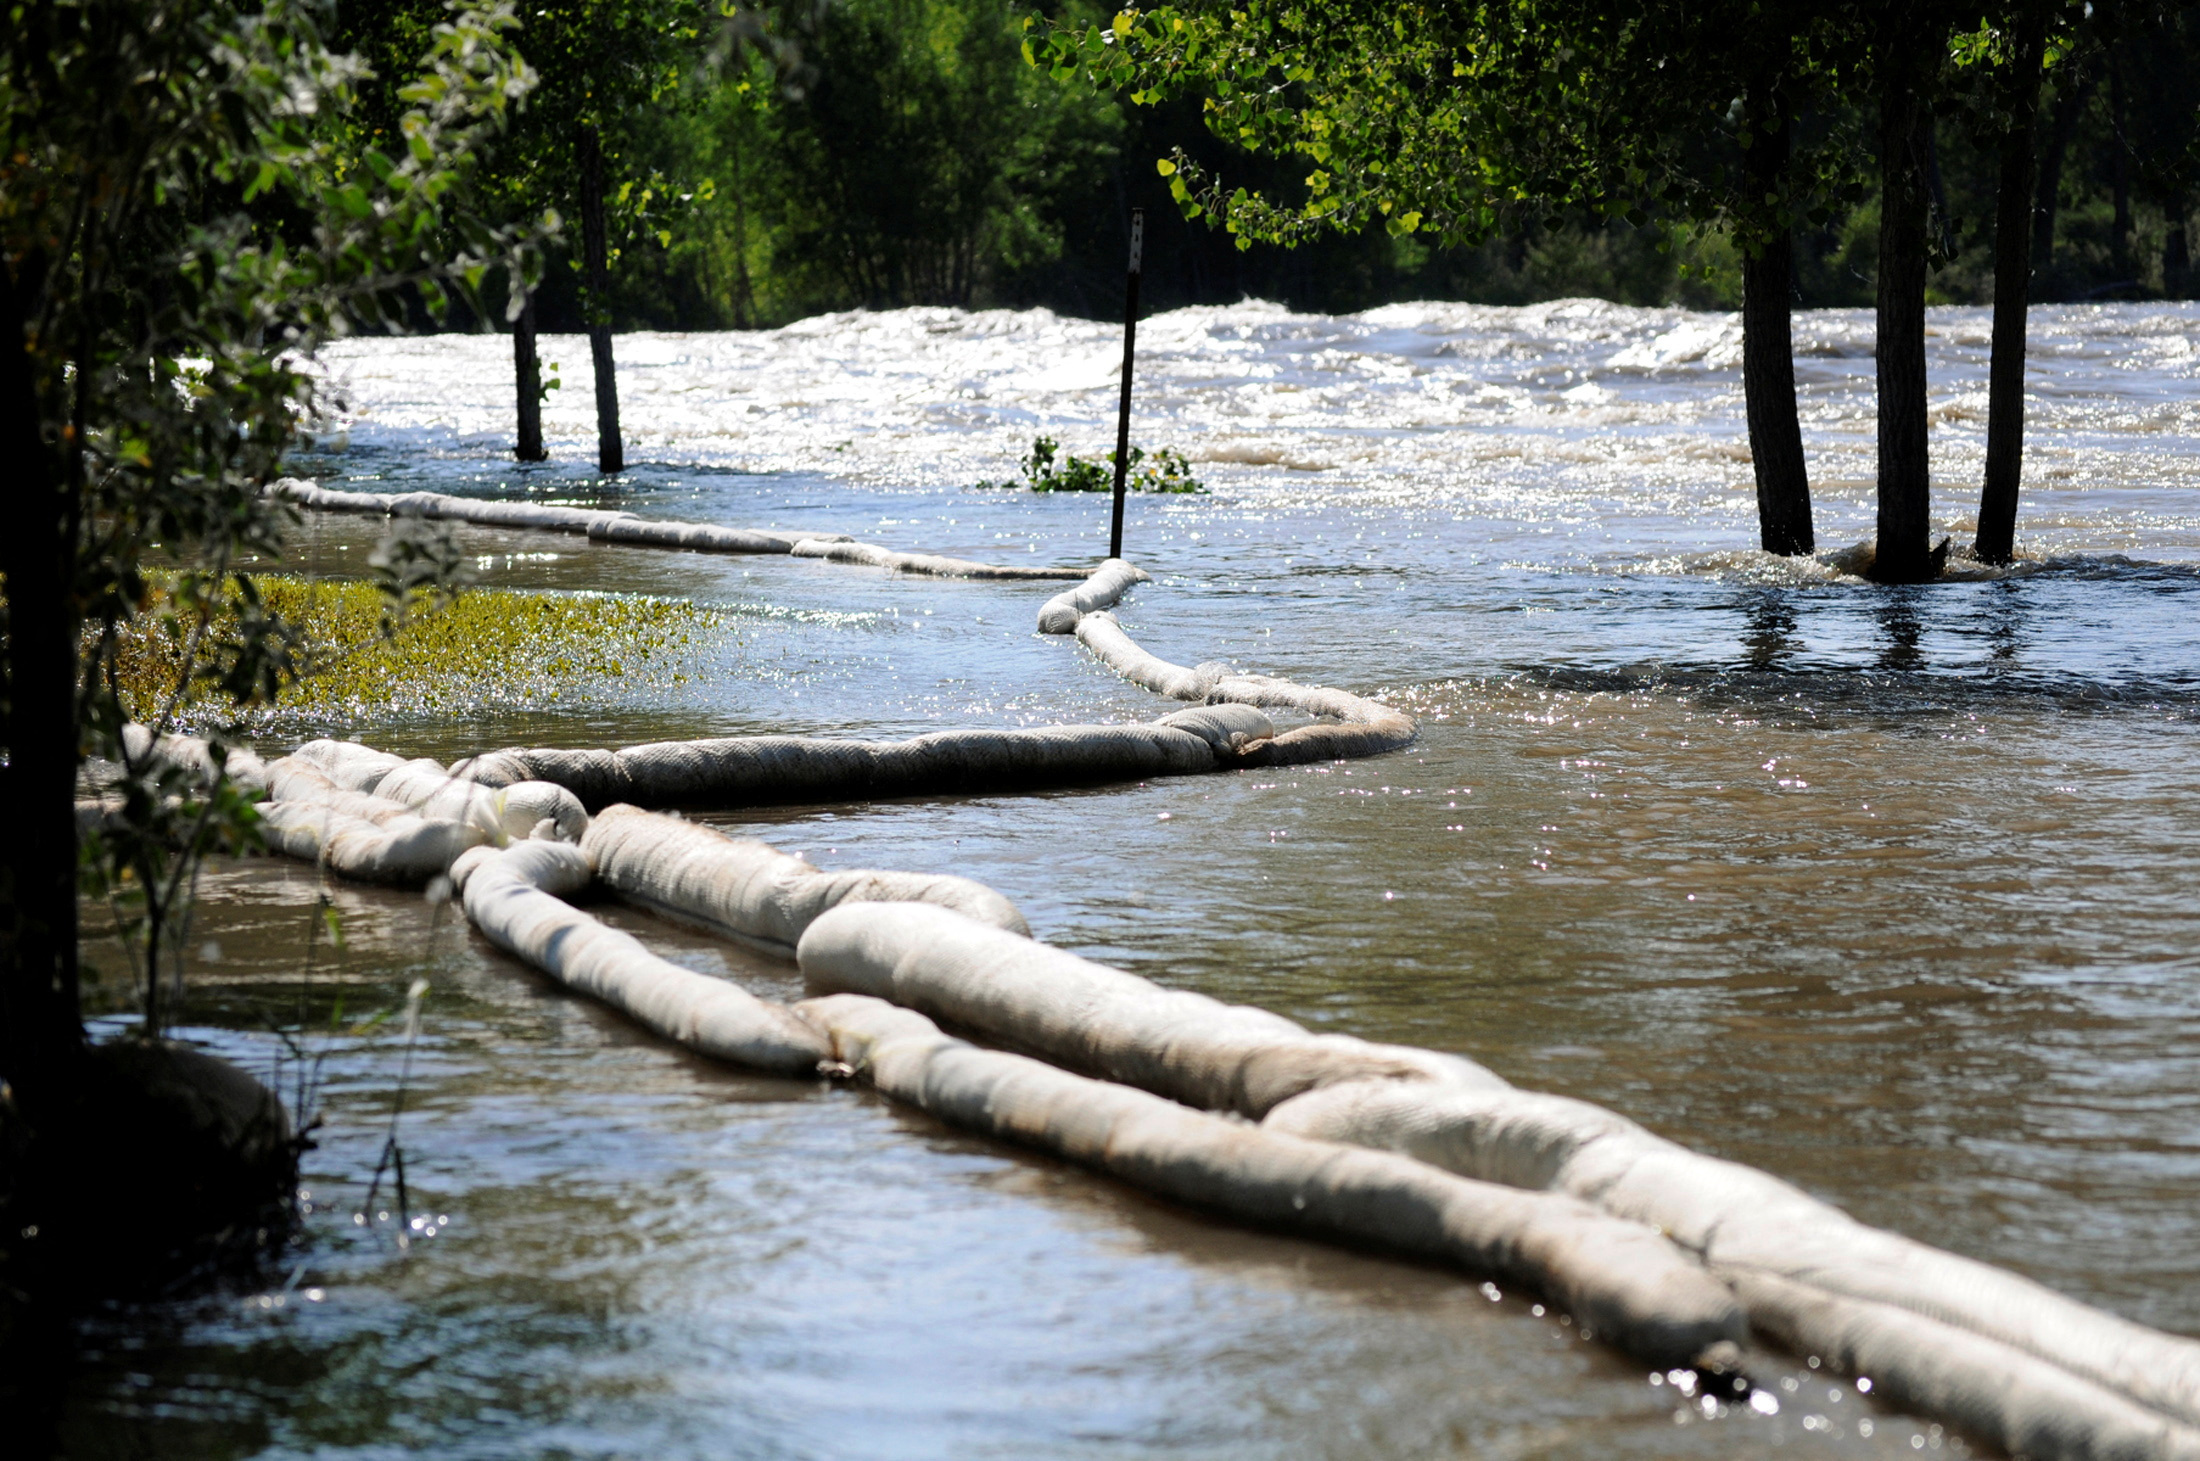 Absorbent boom is placed after an oil spill along the Yellowstone River in Laurel Montana